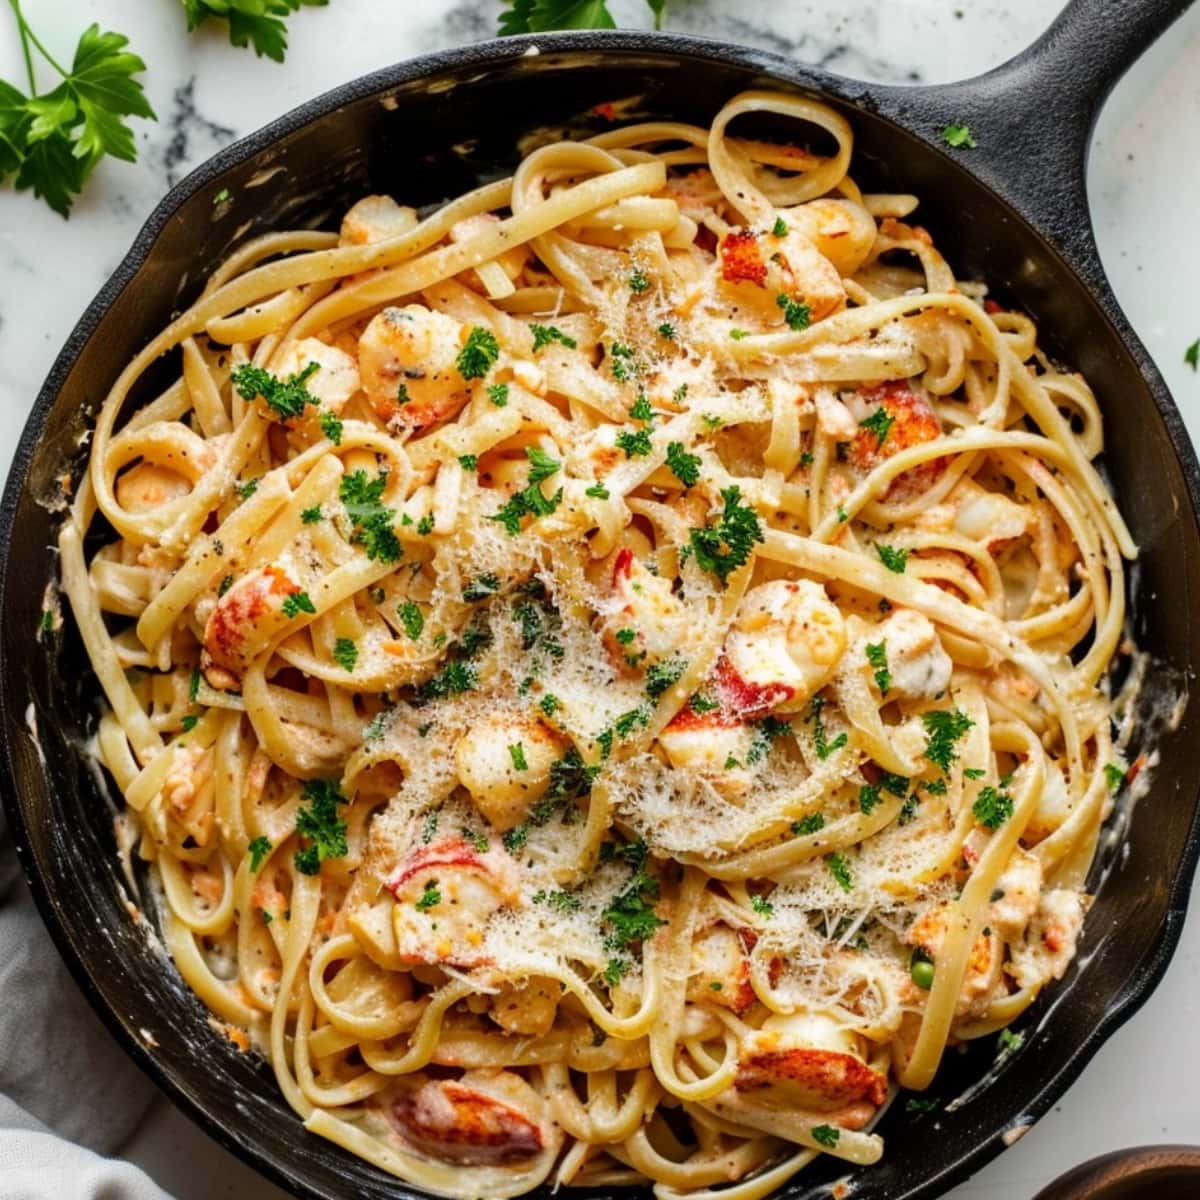 Creamy pasta linguine with lobster in a cast iron skillet.